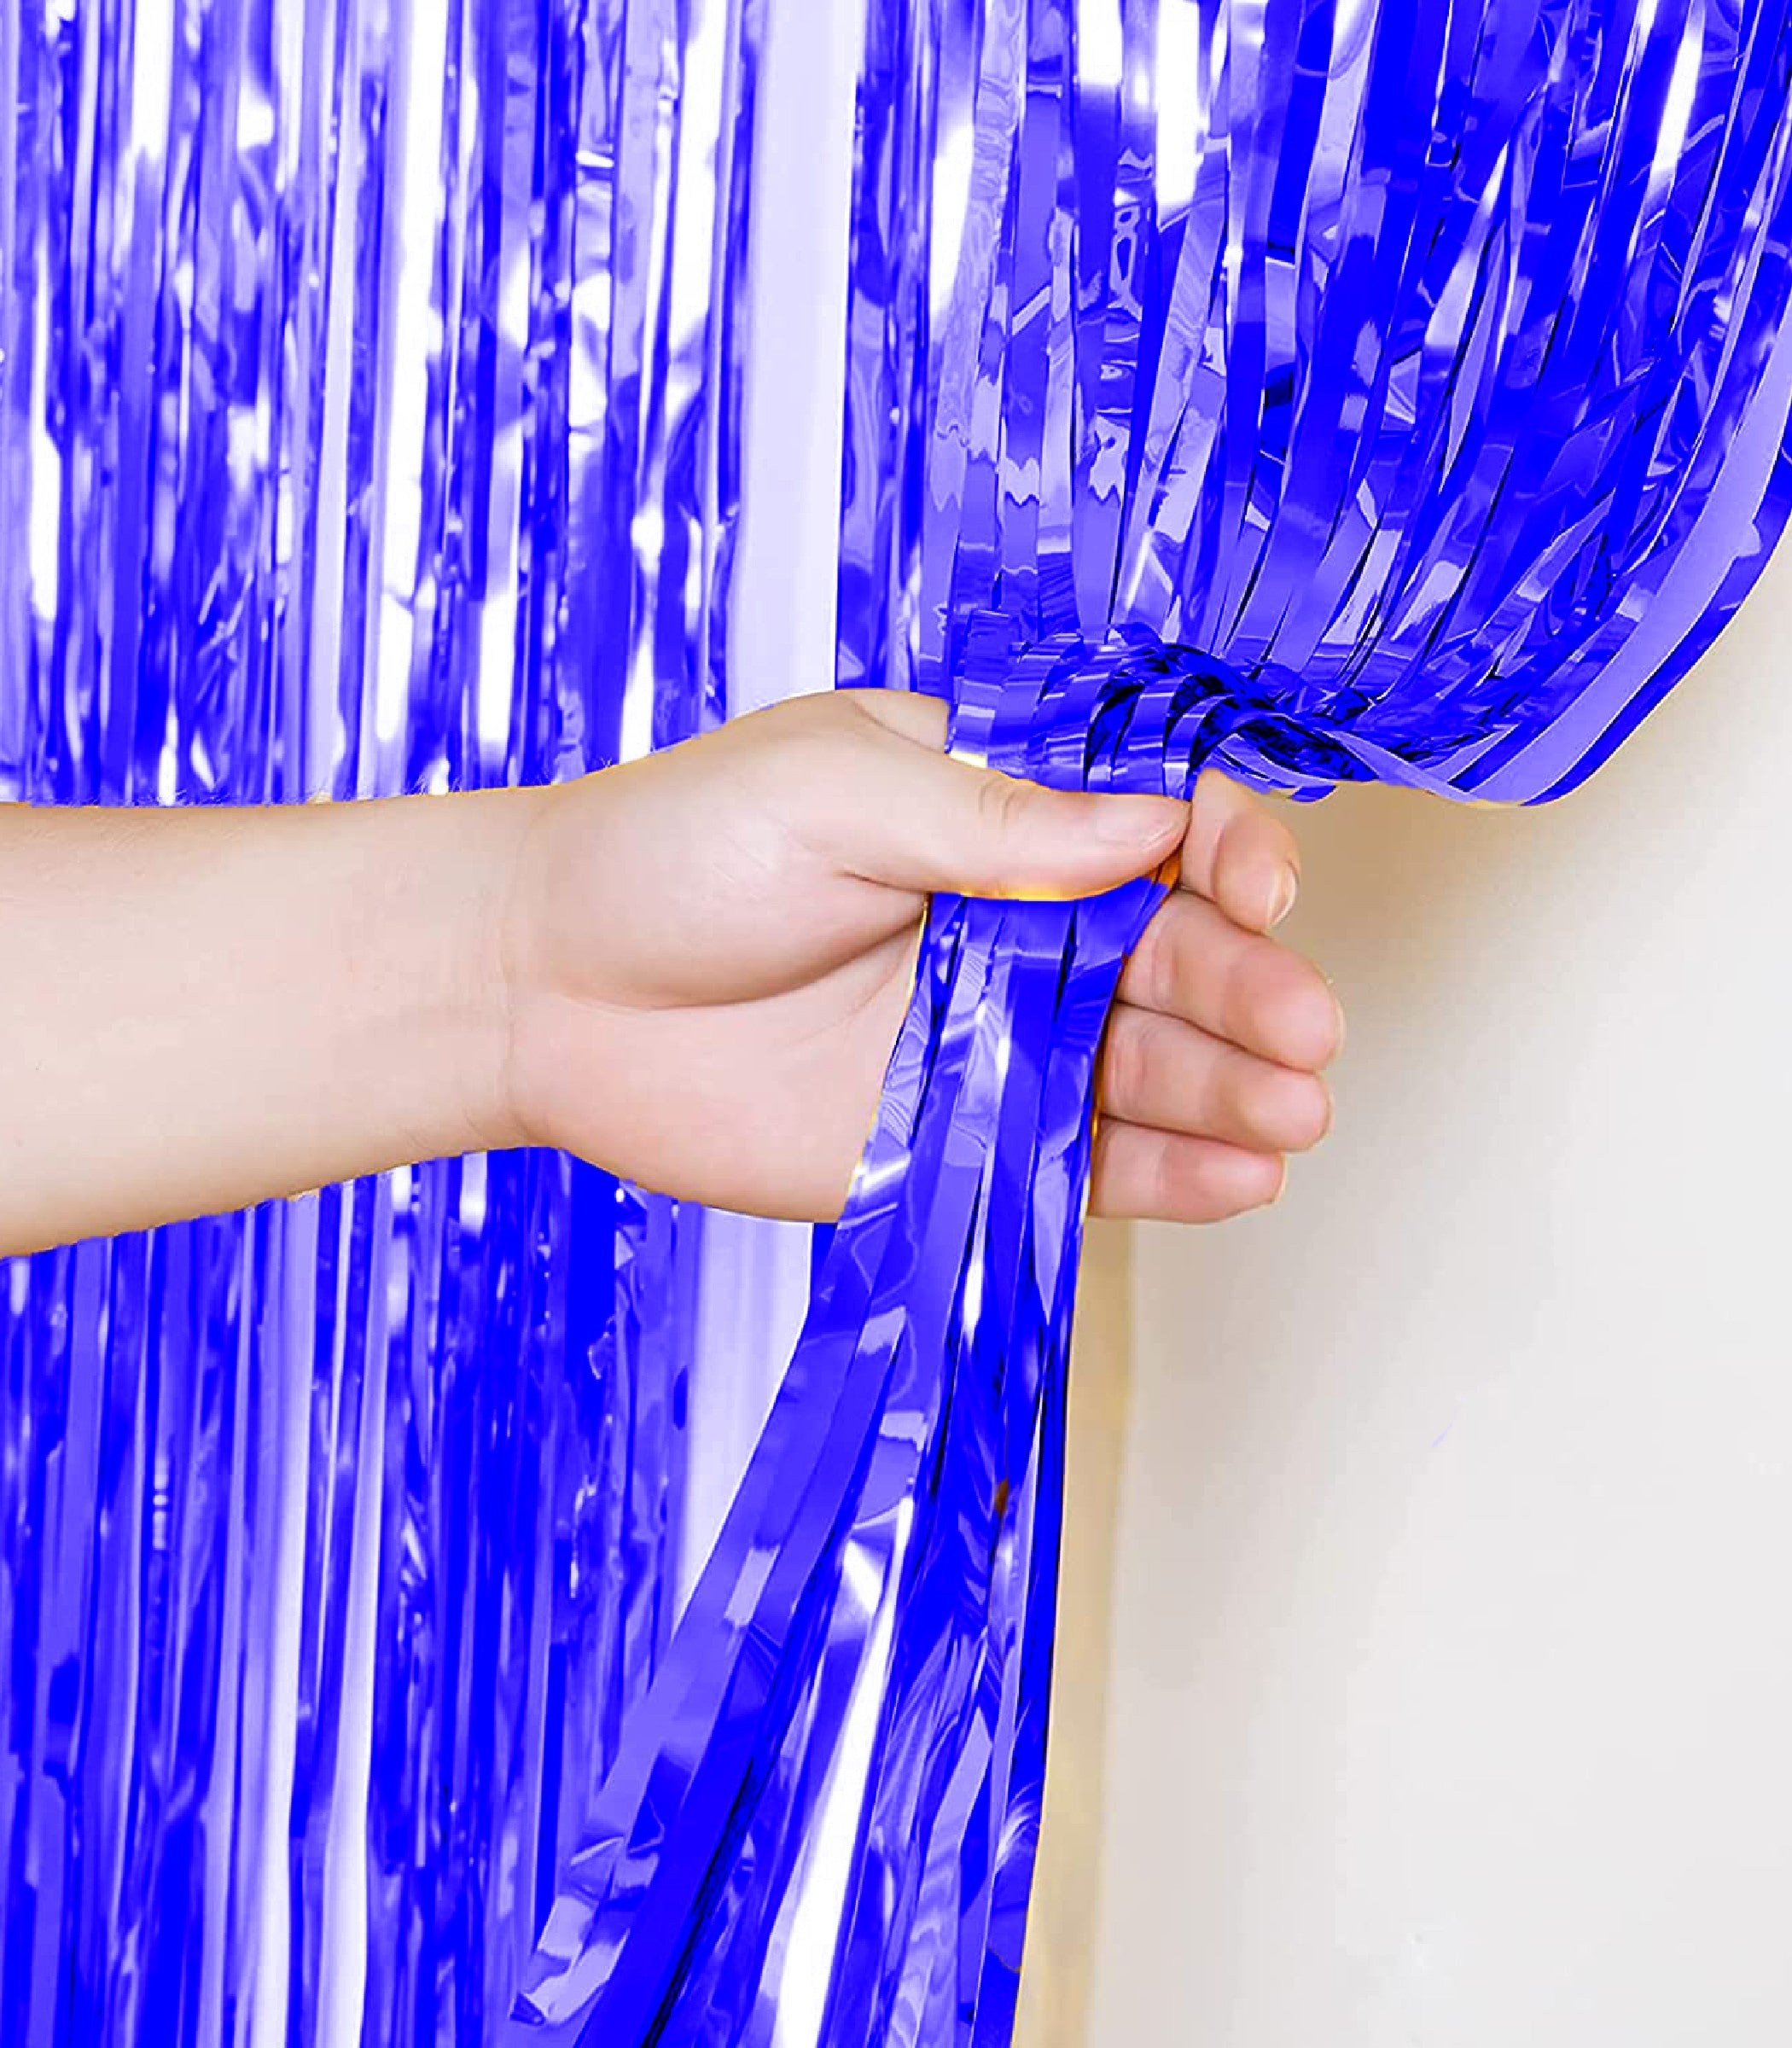 PSI Party Metallic Blue Shimmer Curtain